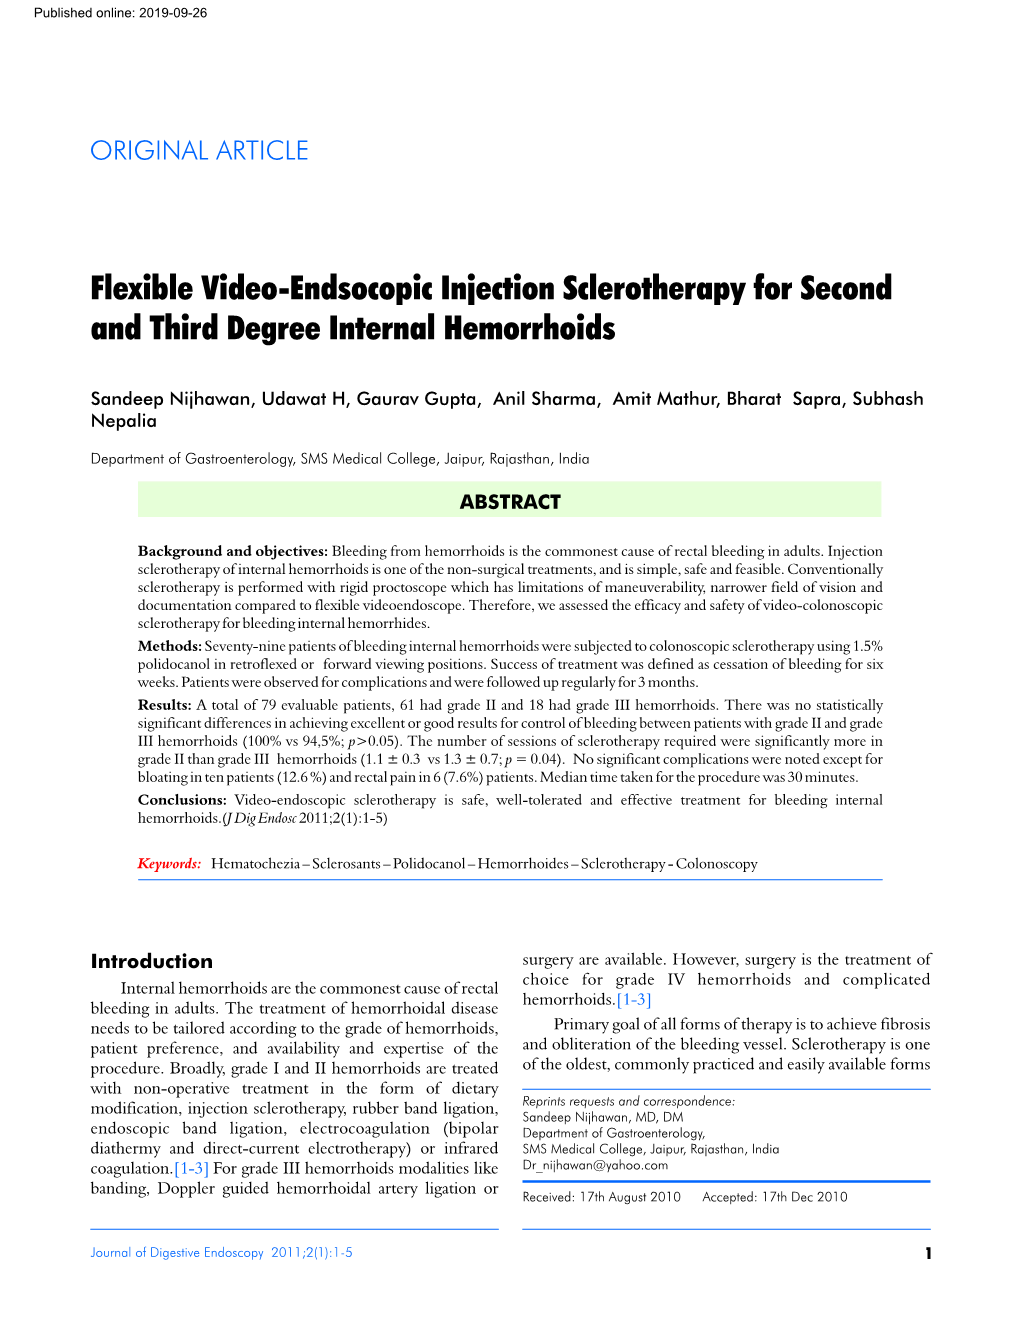 Flexible Video-Endsocopic Injection Sclerotherapy for Second and Third Degree Internal Hemorrhoids